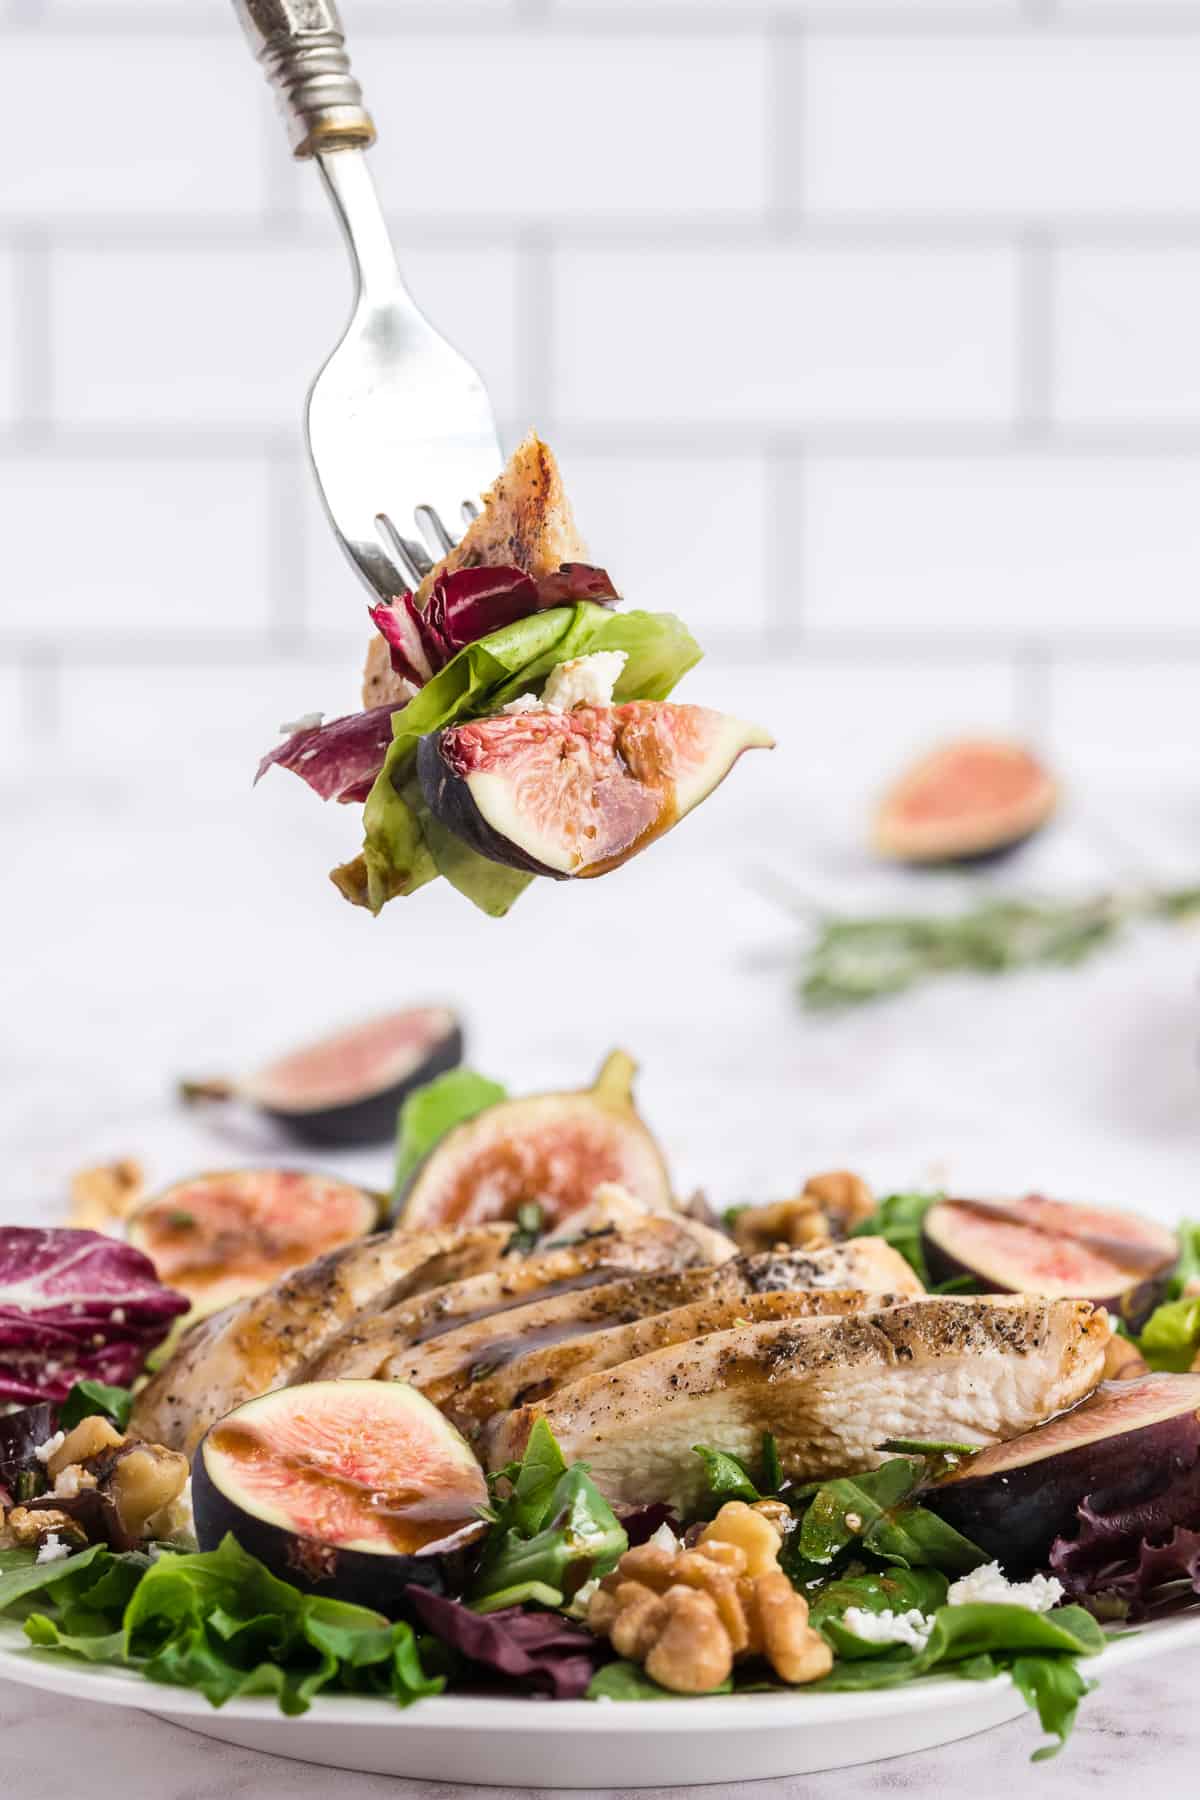 A bite of fig salad being lifted up over a plate of lettuce, figs and chicken with a white tile background.